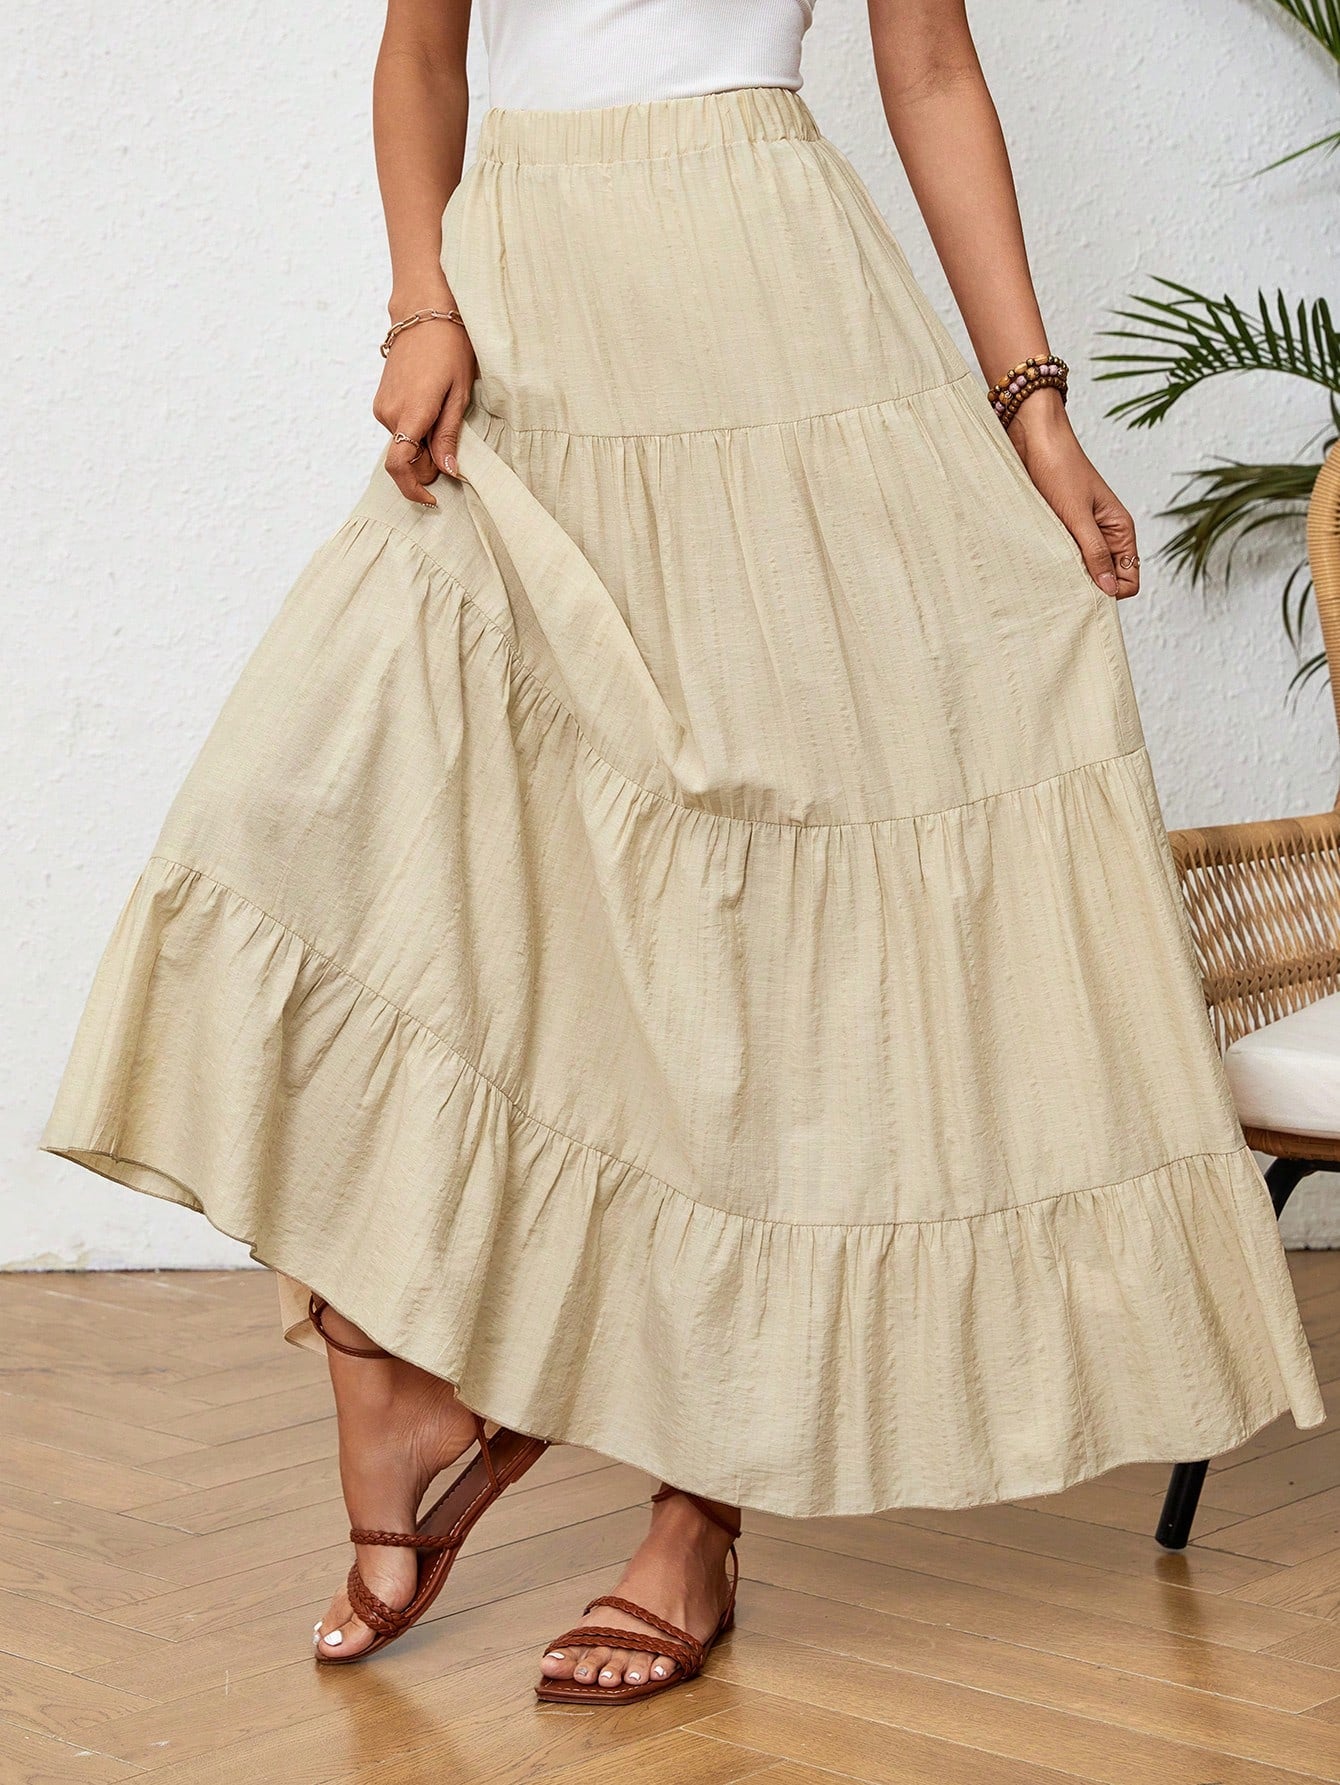 Women's Solid Color Ruffle Hem Casual Daily Wear Skirt, Spring/Summer